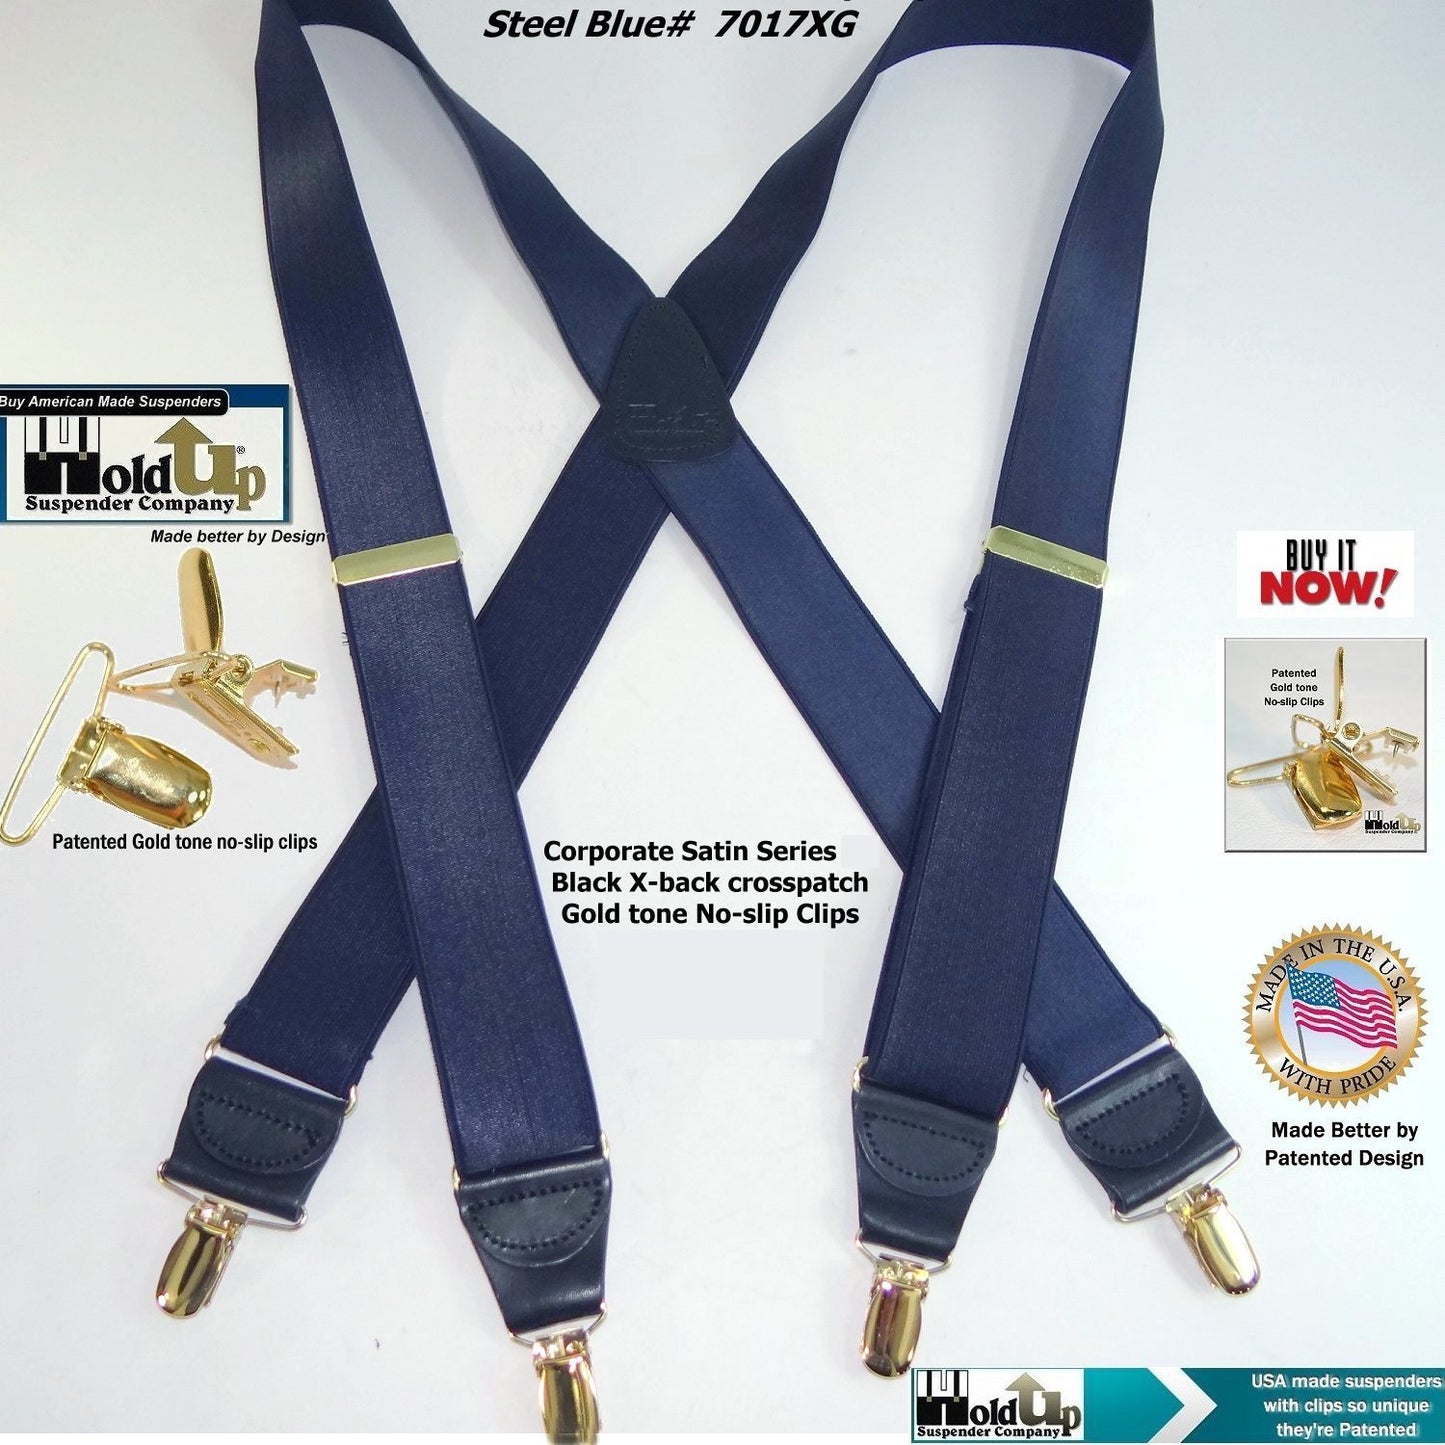 Holdup Brand Deep Steel Blue Satin Finish Suspenders in X-back style with Patented gold tone No-slip Clips